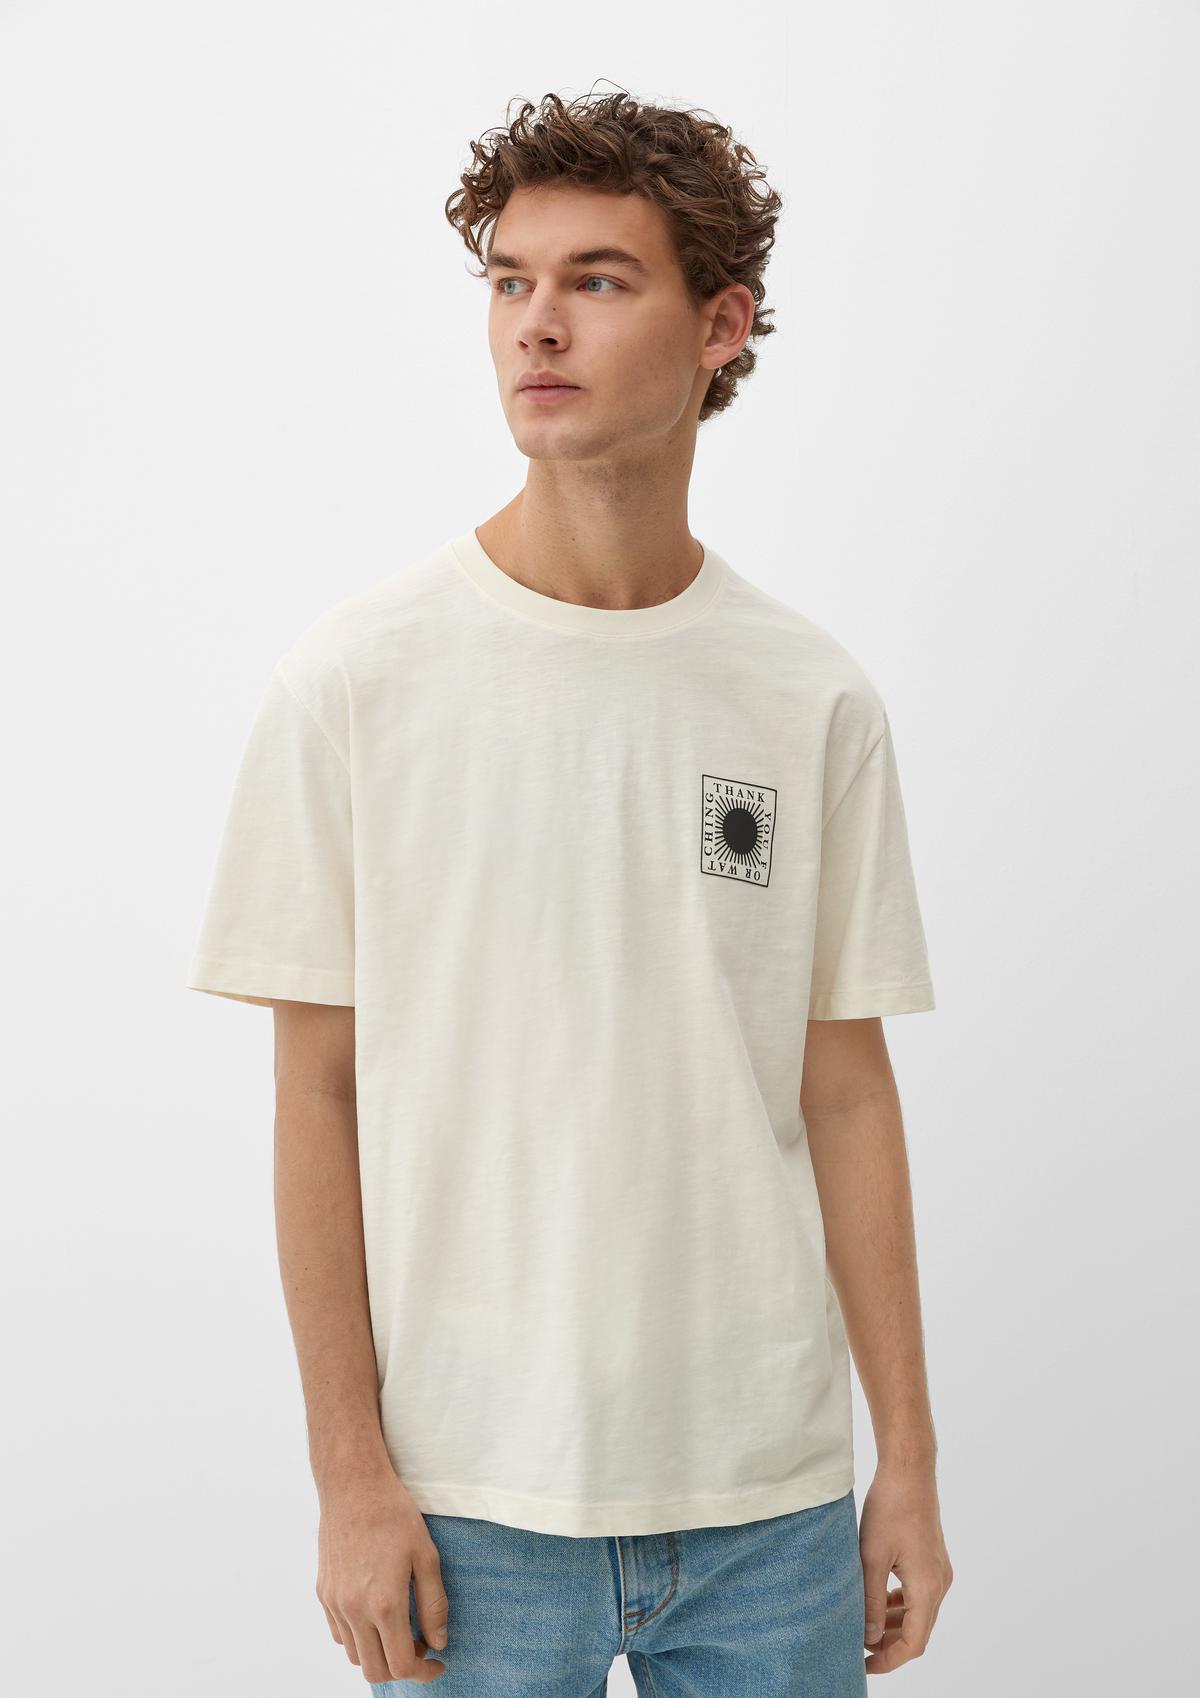 stretch white cotton - in Printed T-shirt